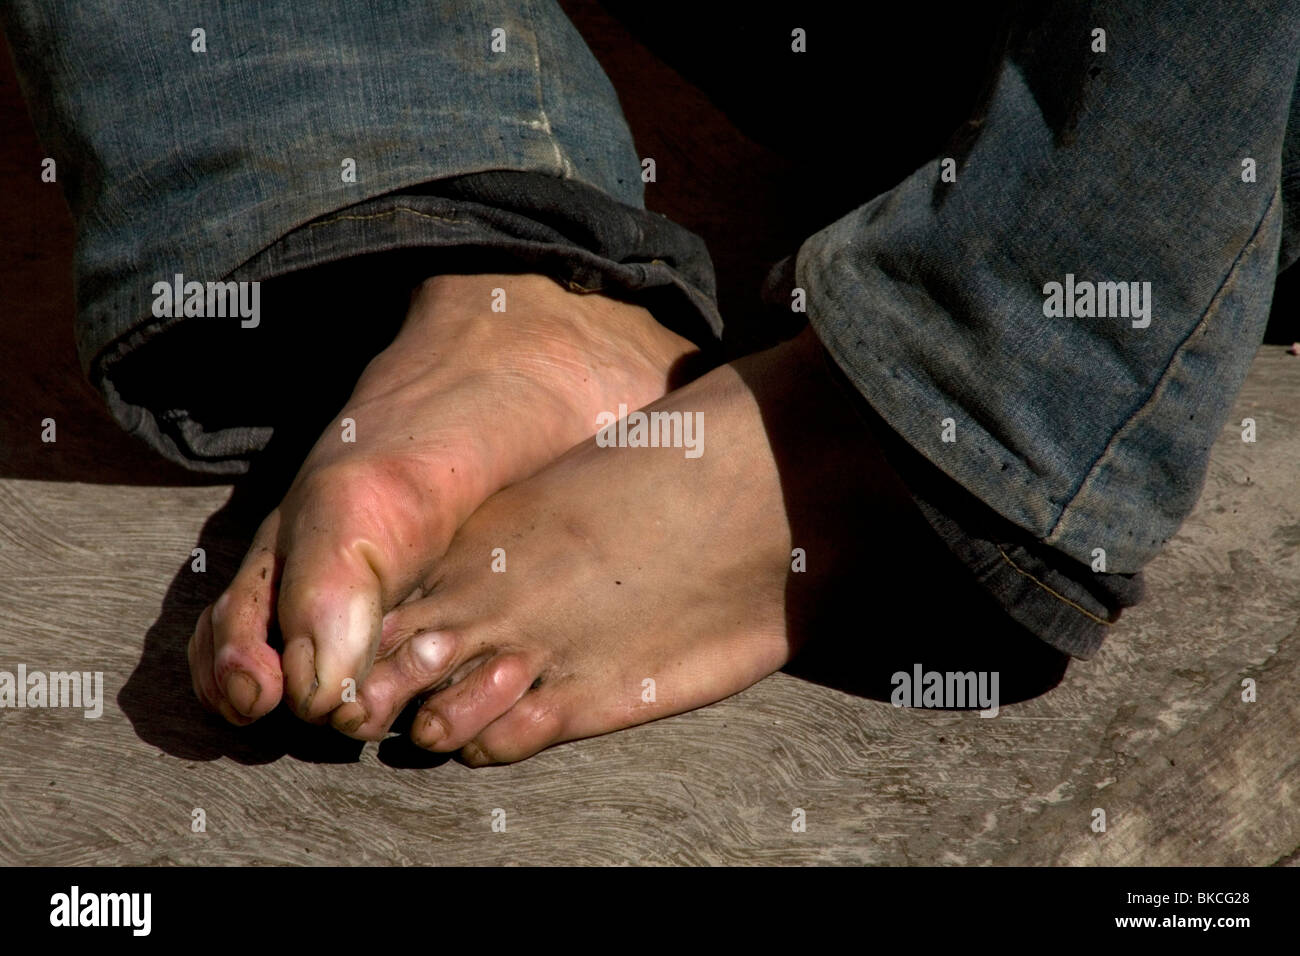 The blistered feet of an undocumented Central American migrant traveling across Mexico to reach United States, Mexico City. Stock Photo